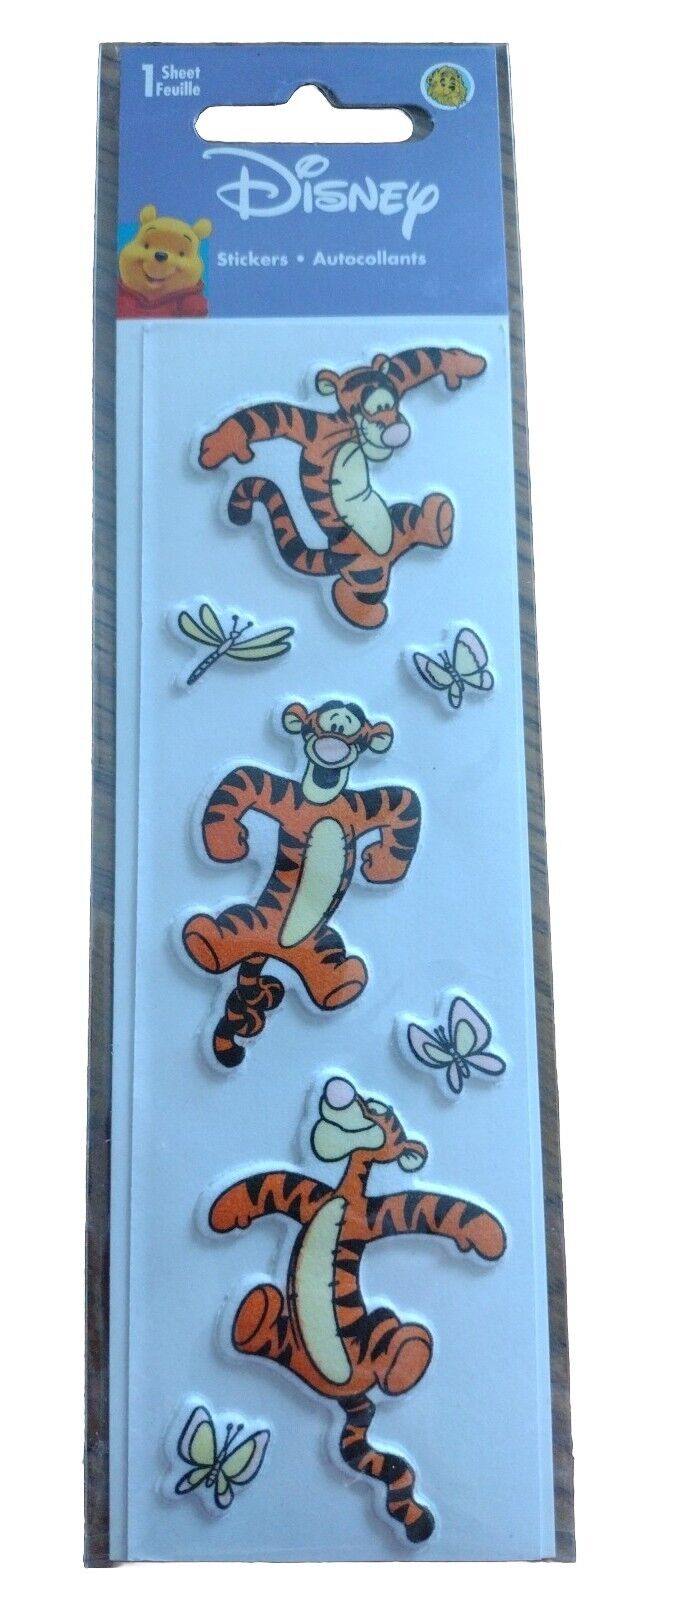 New Sealed Sandylion Stickers  **VINTAGE**  Puffy Tigger Pooh Stickers